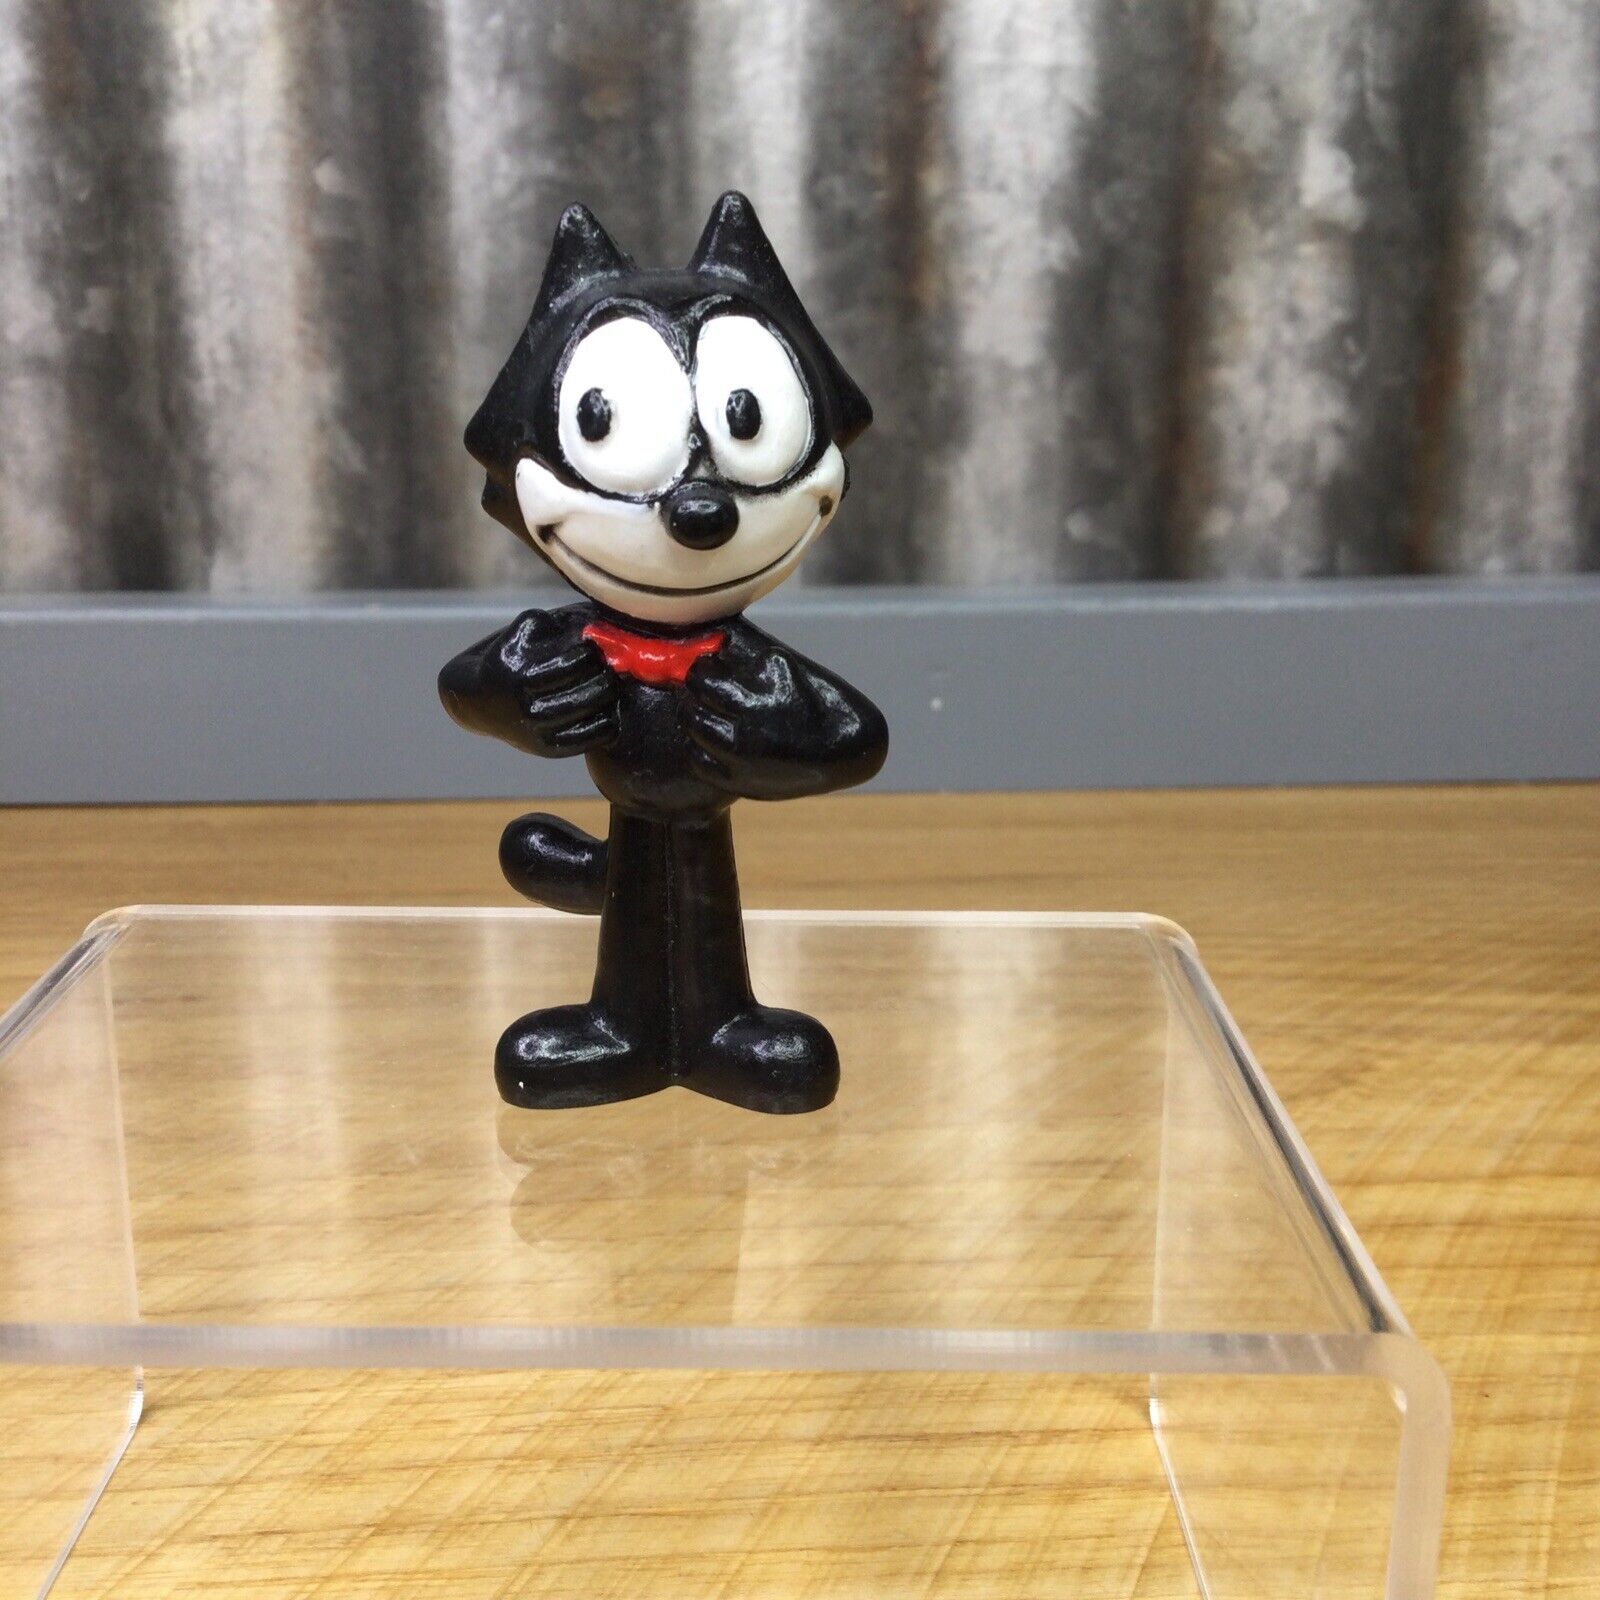 Vtg Felix the Cat Mini PVC Figure Adjusting His Red Bow Tie Applause 1989